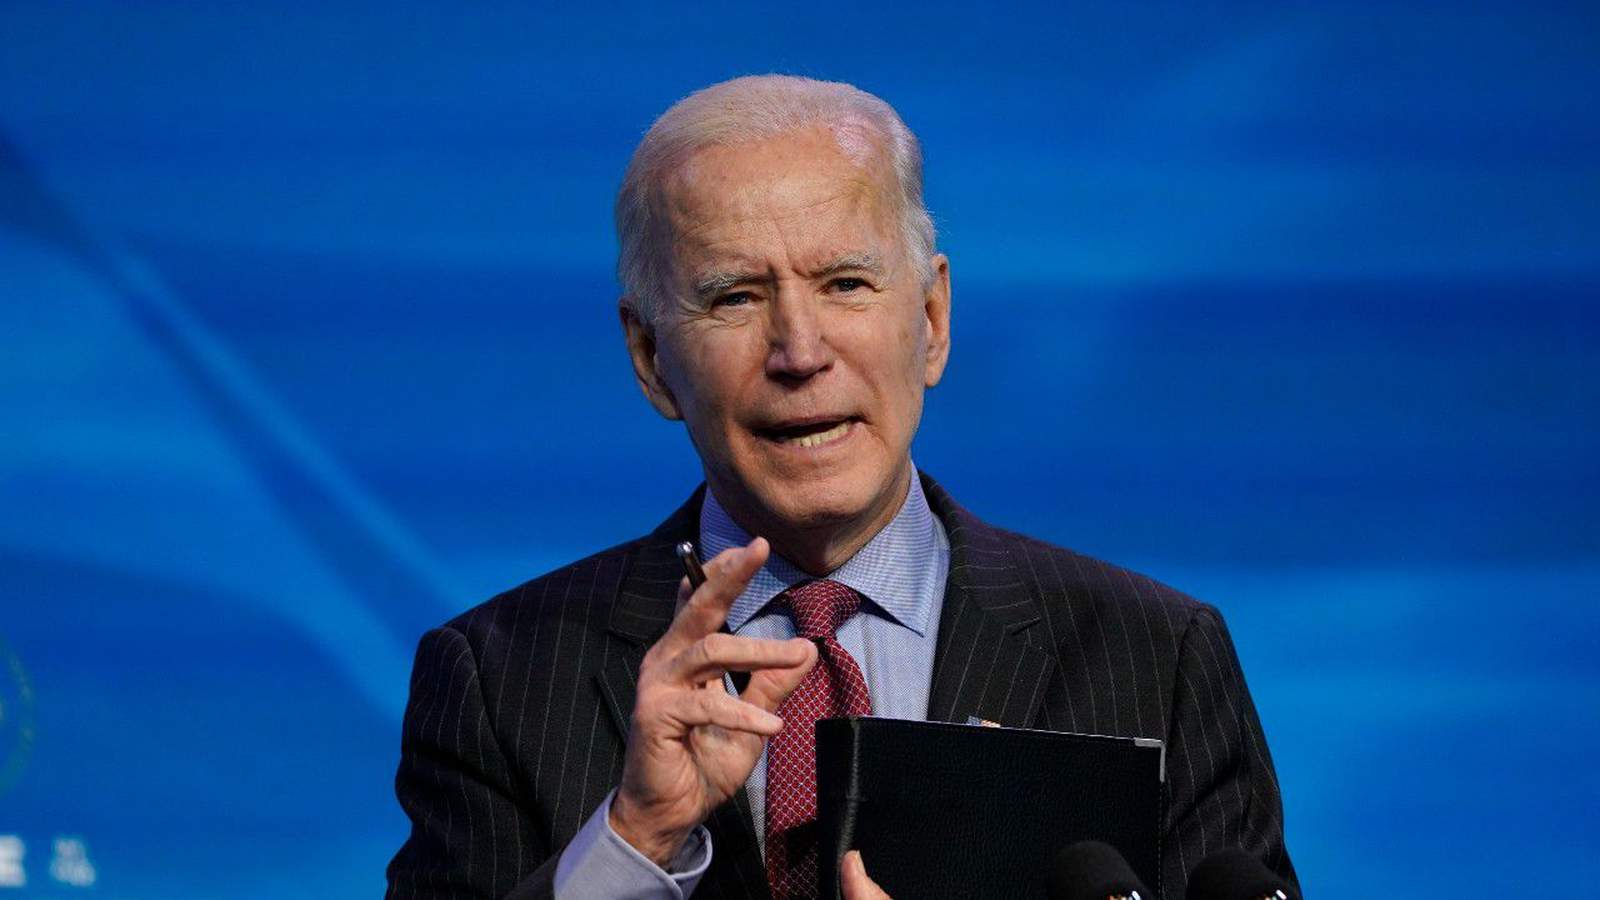 ‘Unchartered territory’ going into Biden administration, UTSA political scientist says